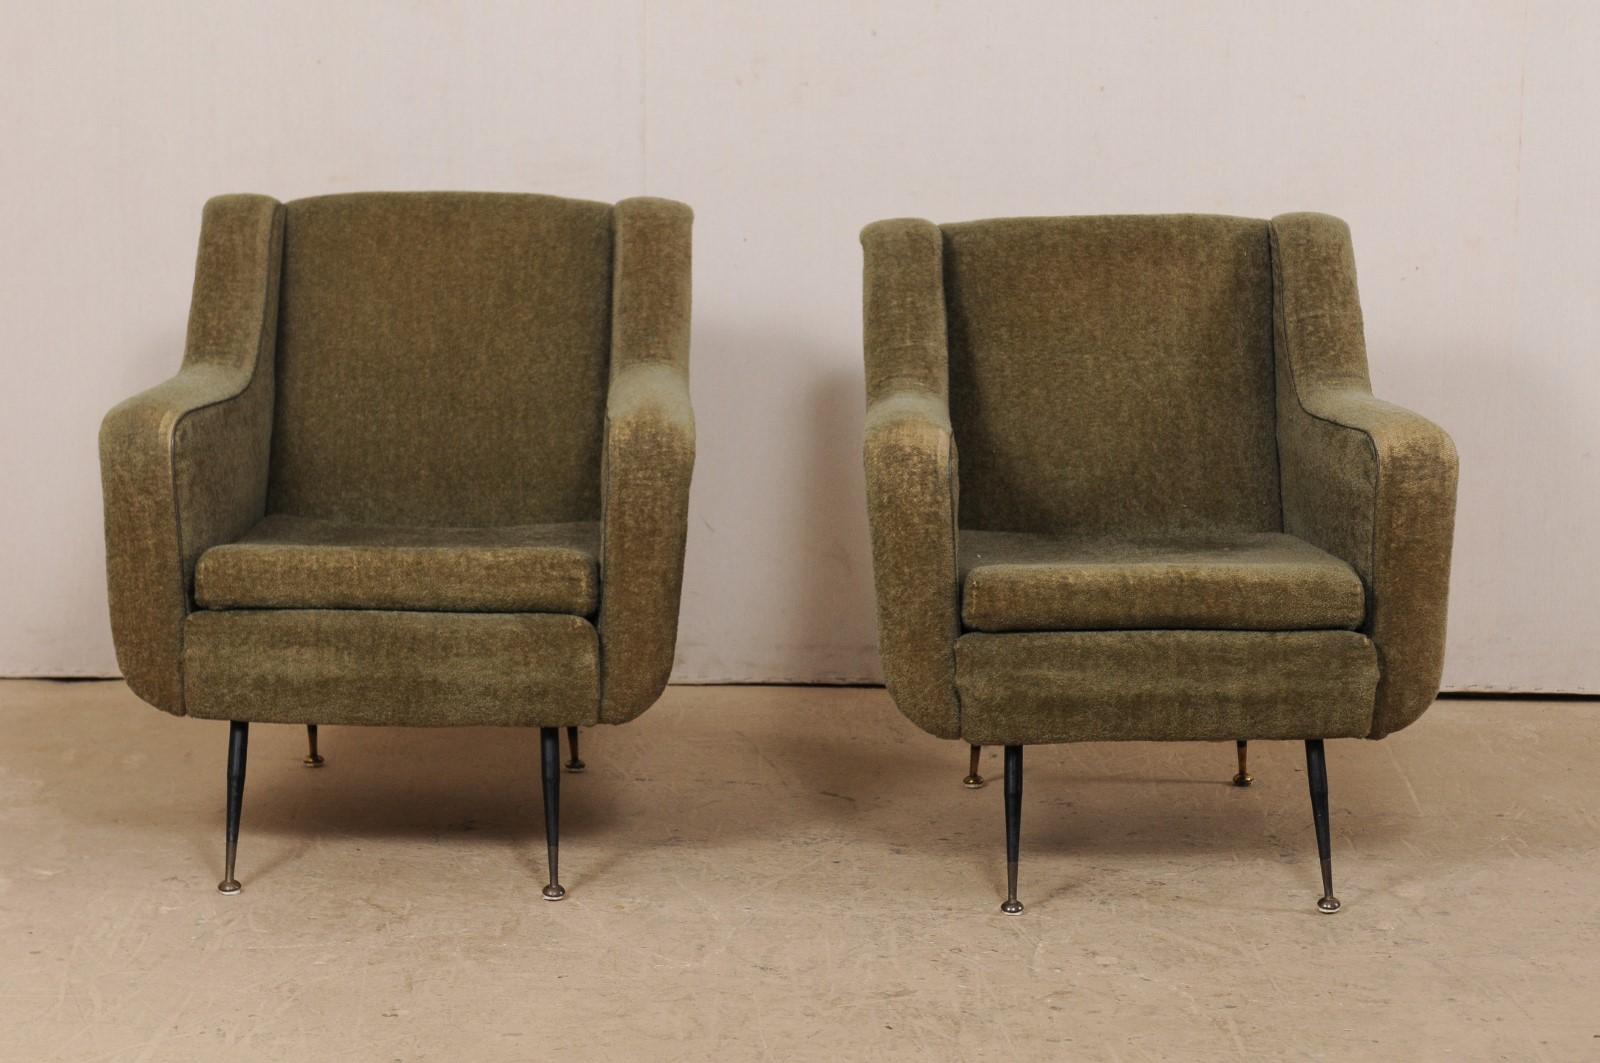 Pair of Mid-Century Modern Upholstered Club Chairs from Italy with Iron Legs 5